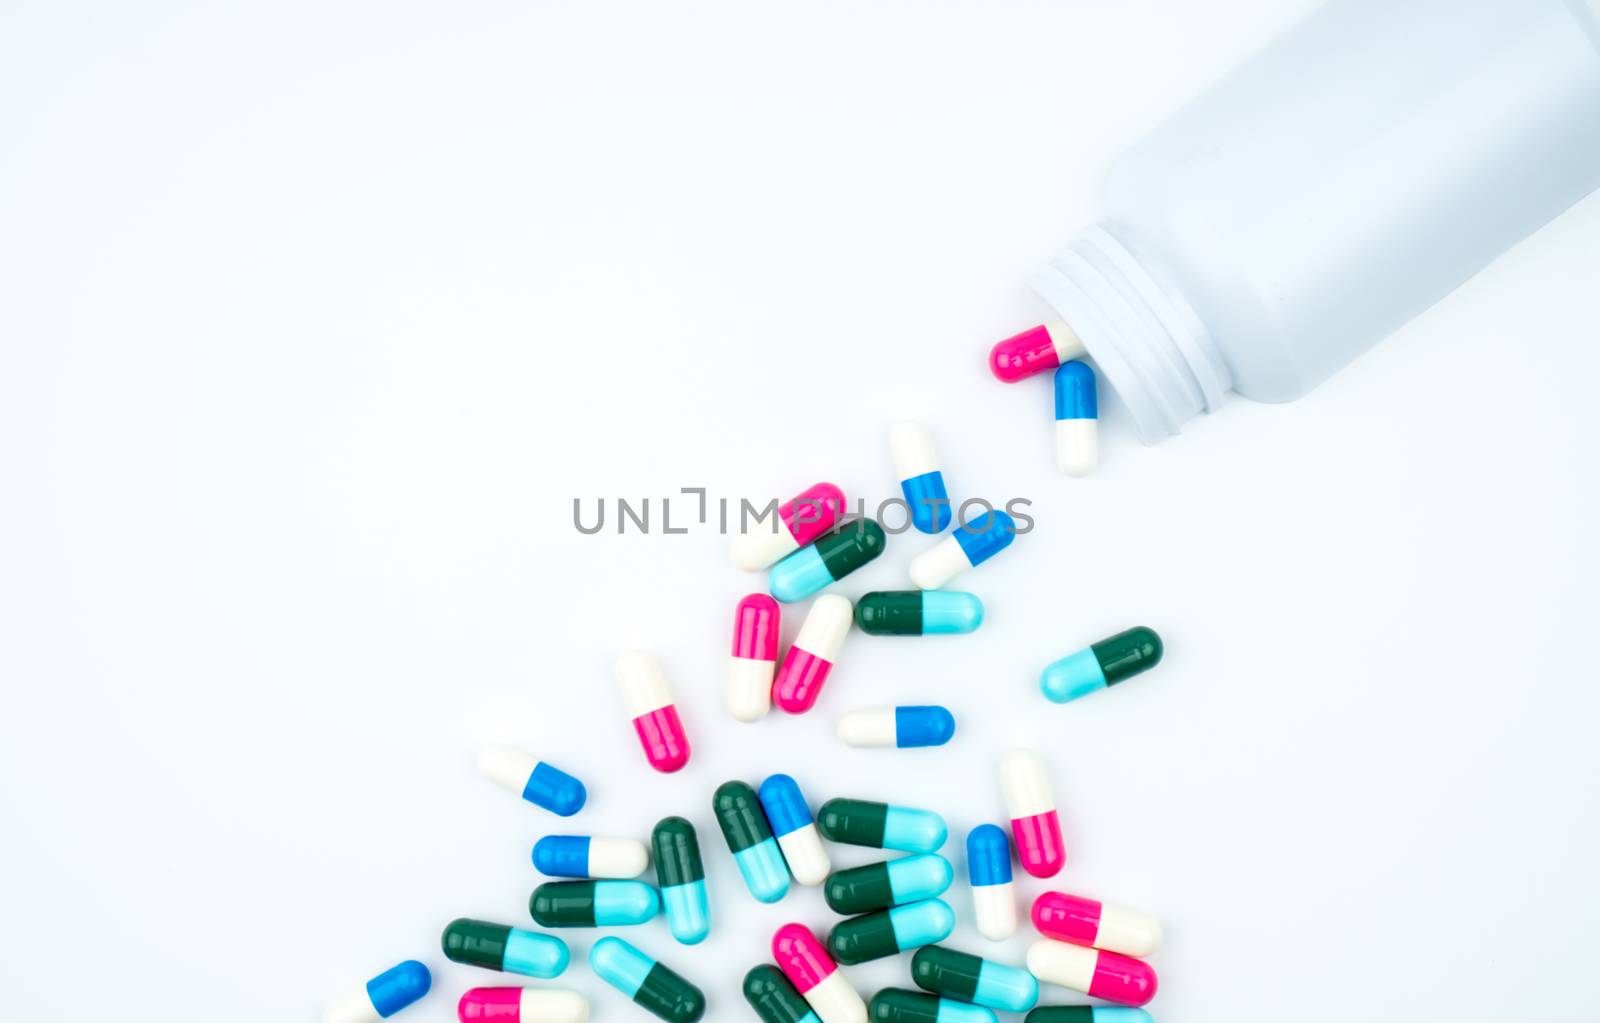 Antibiotic capsules spilling out of pill bottle on white background with copy space, just add your own text. Antibiotic drug use with reasonable concept. Antimicrobial drug overuse. Pharmaceutical industry. Pharmacy background. Global healthcare. Health budgets and policy concept.